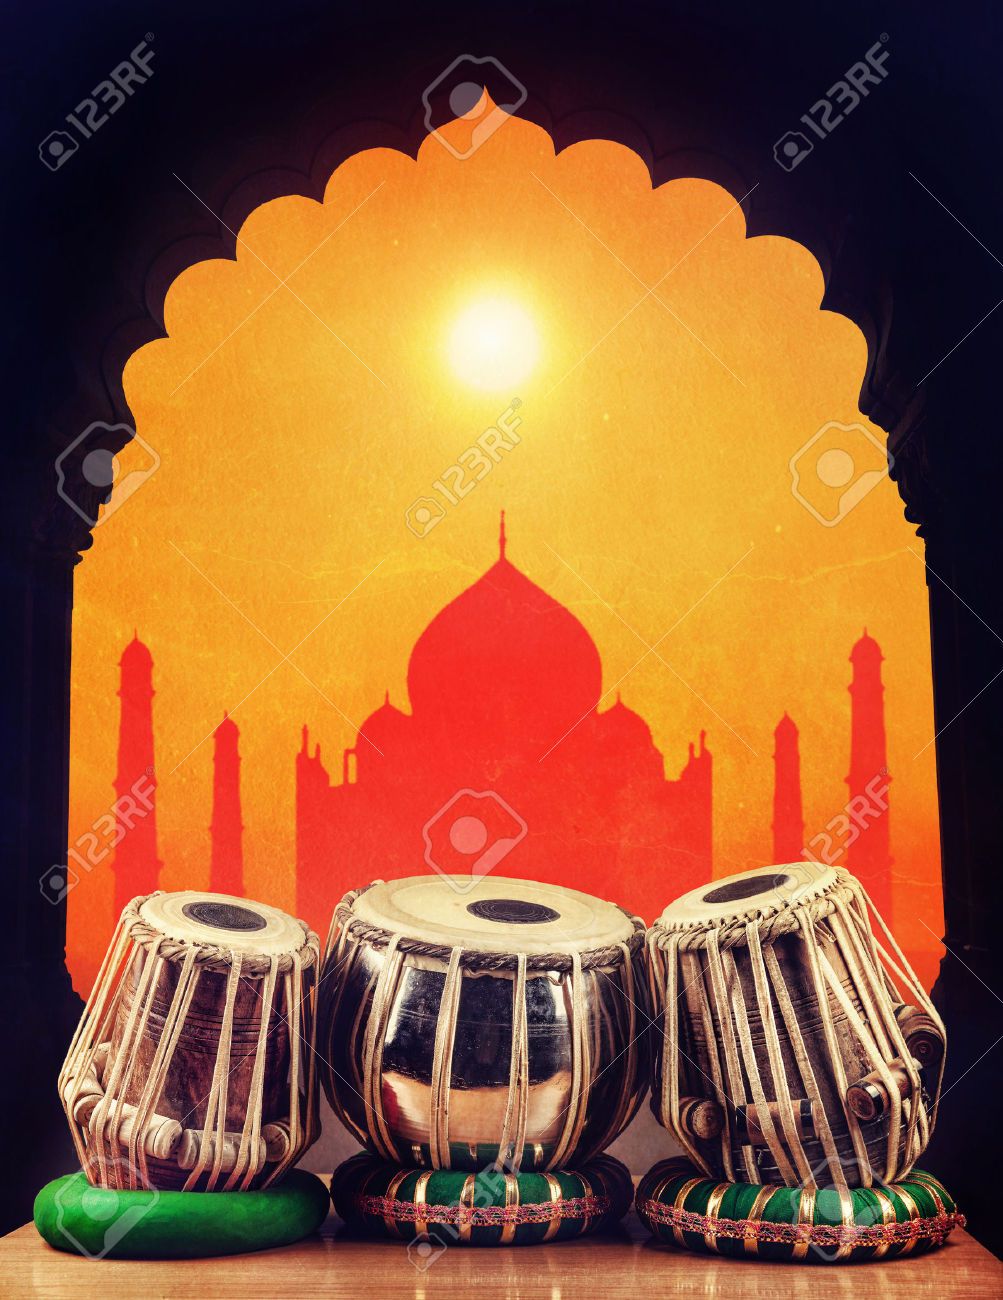 Tabla Drums Google Search Music Wallpaper Indian Instruments